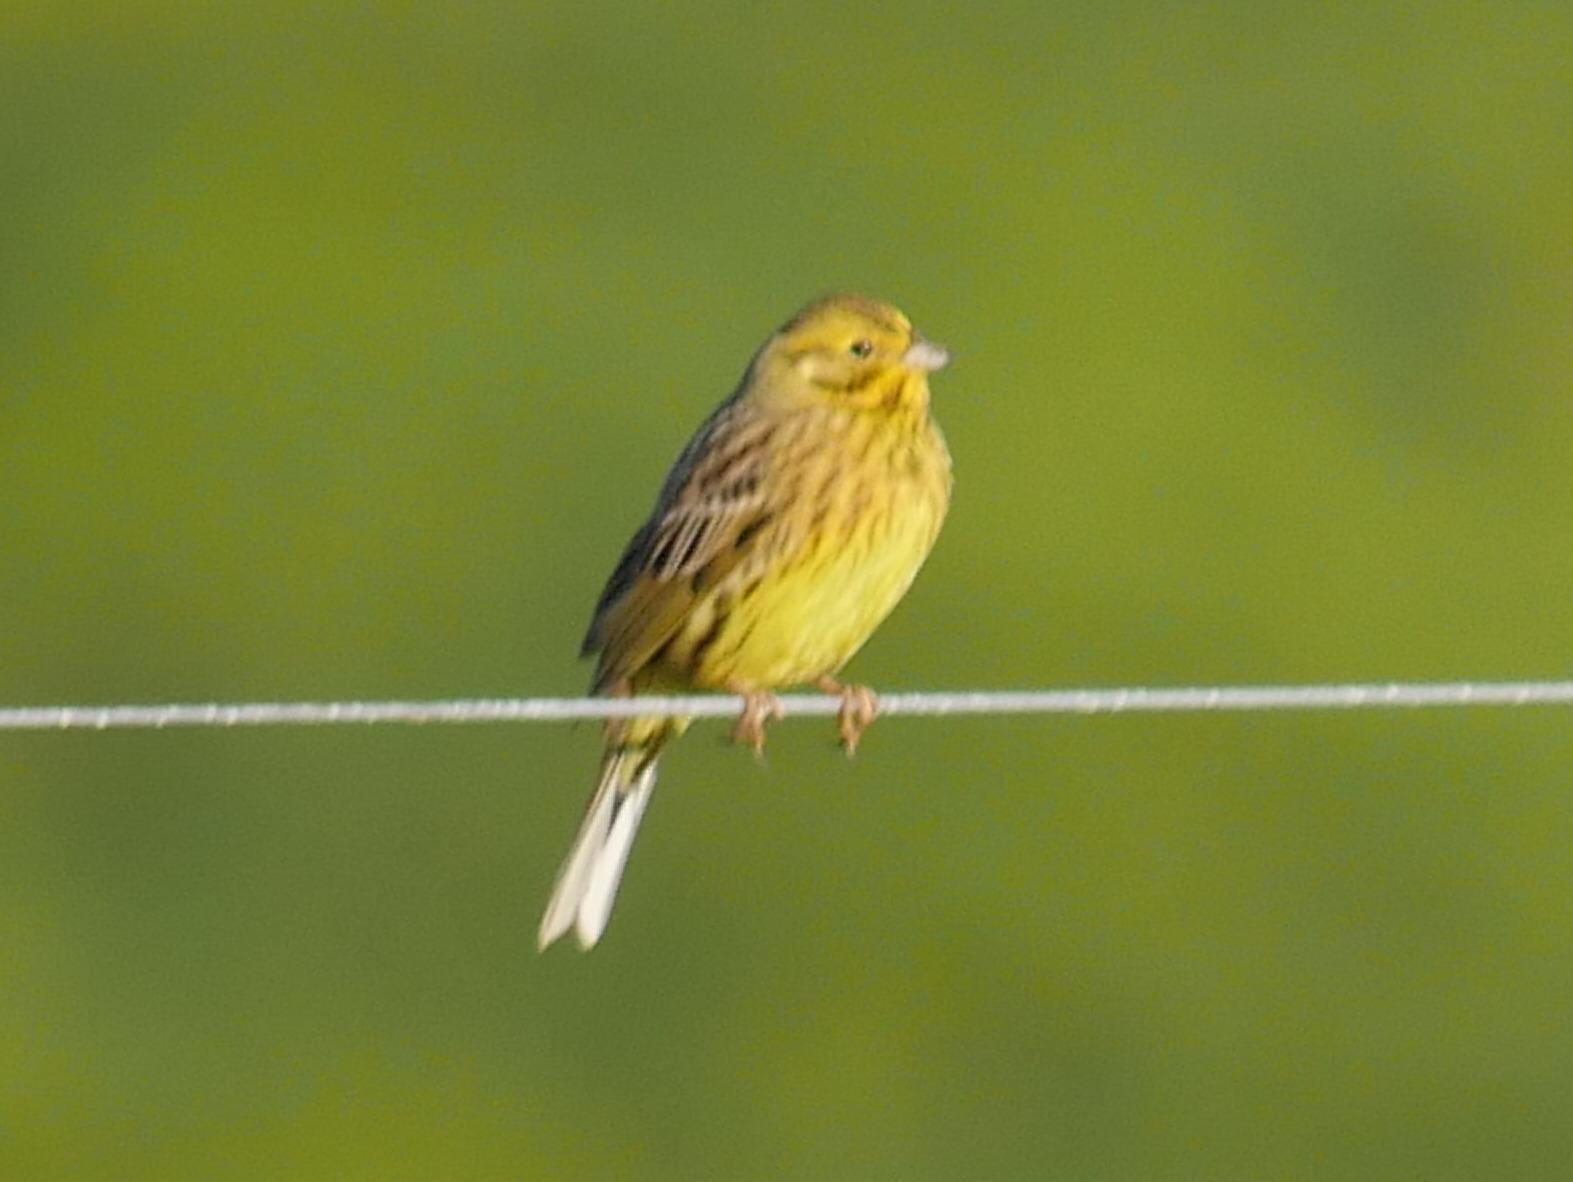 Yellowhammer Photo by Peter Lowe